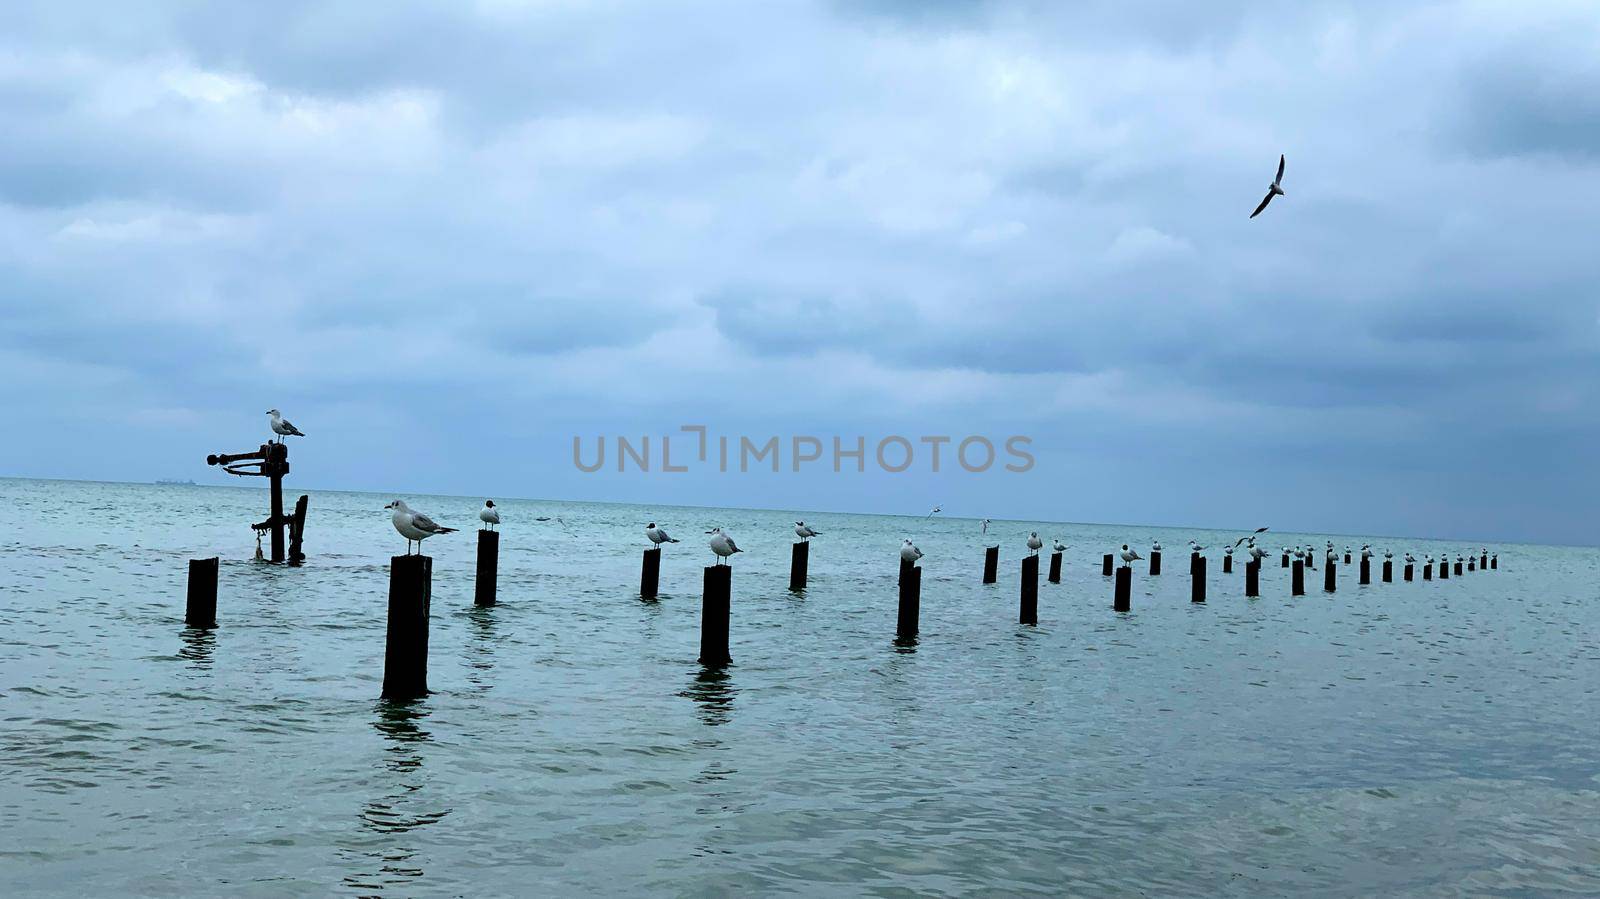 Sea gull sits on a rusty barrel in the Black Sea with dark clouds. Beach image